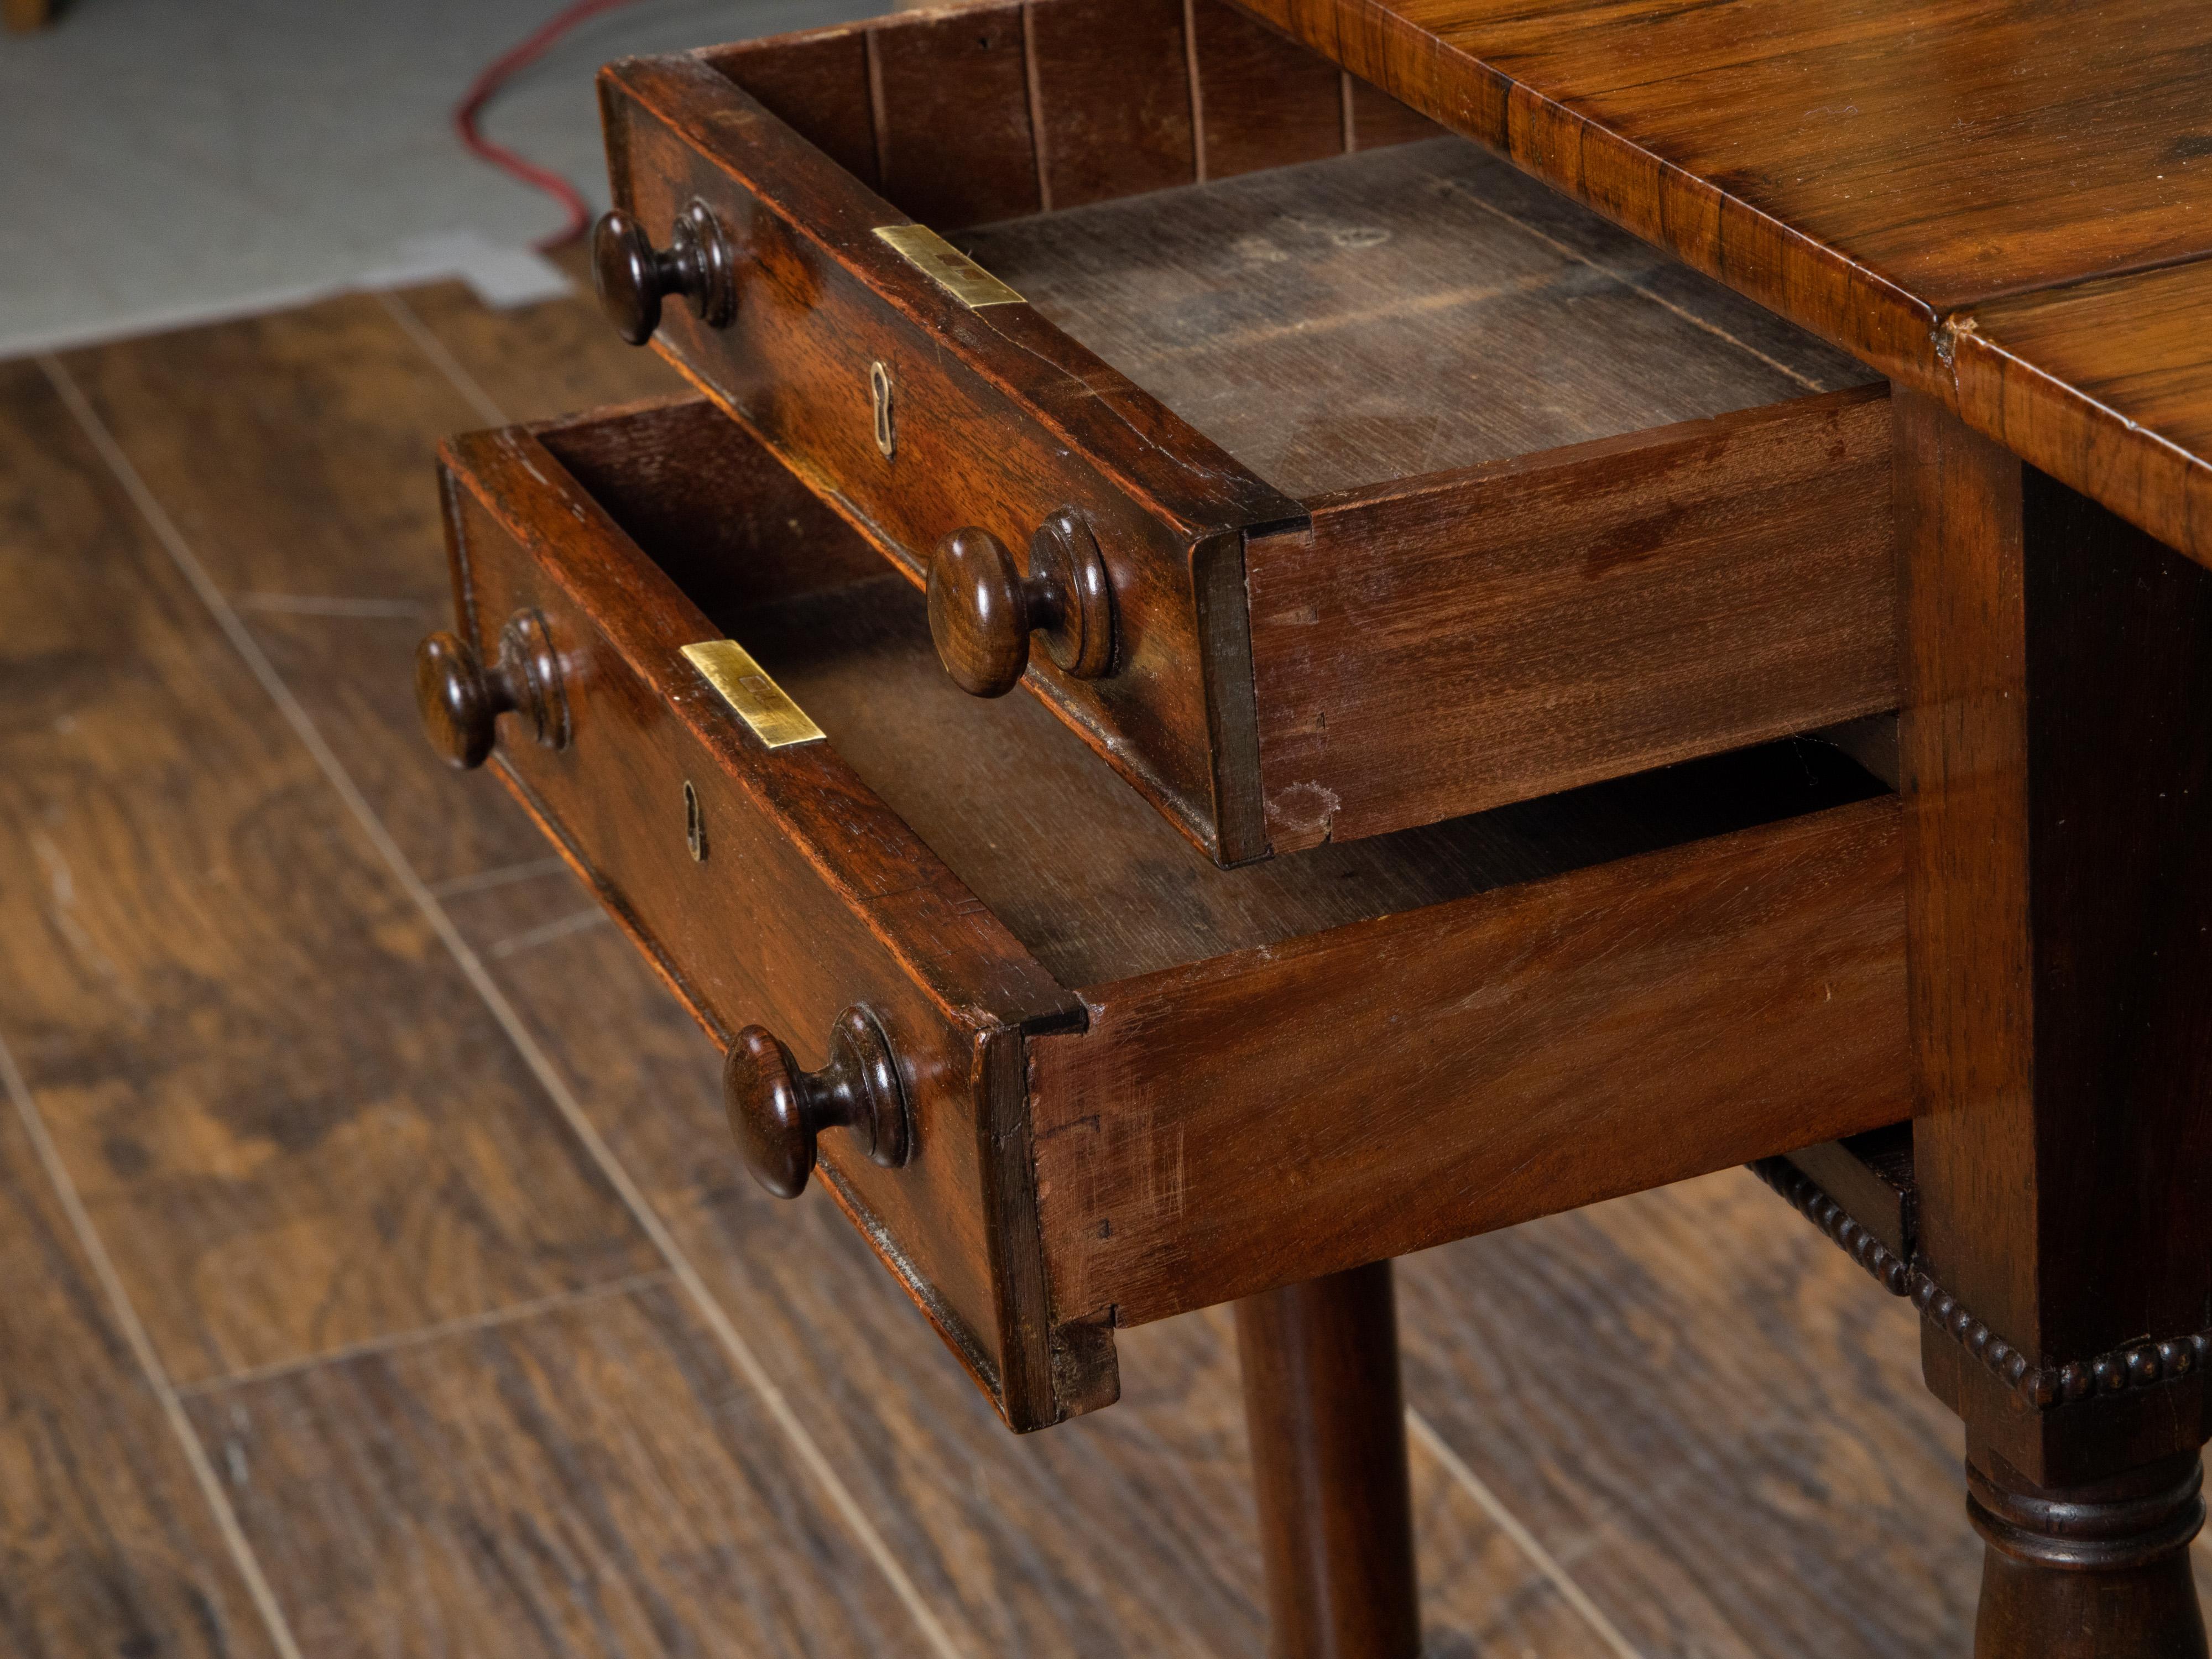 English Regency 1820s Mahogany Pembroke Table with Drop Leaves and Drawers For Sale 8